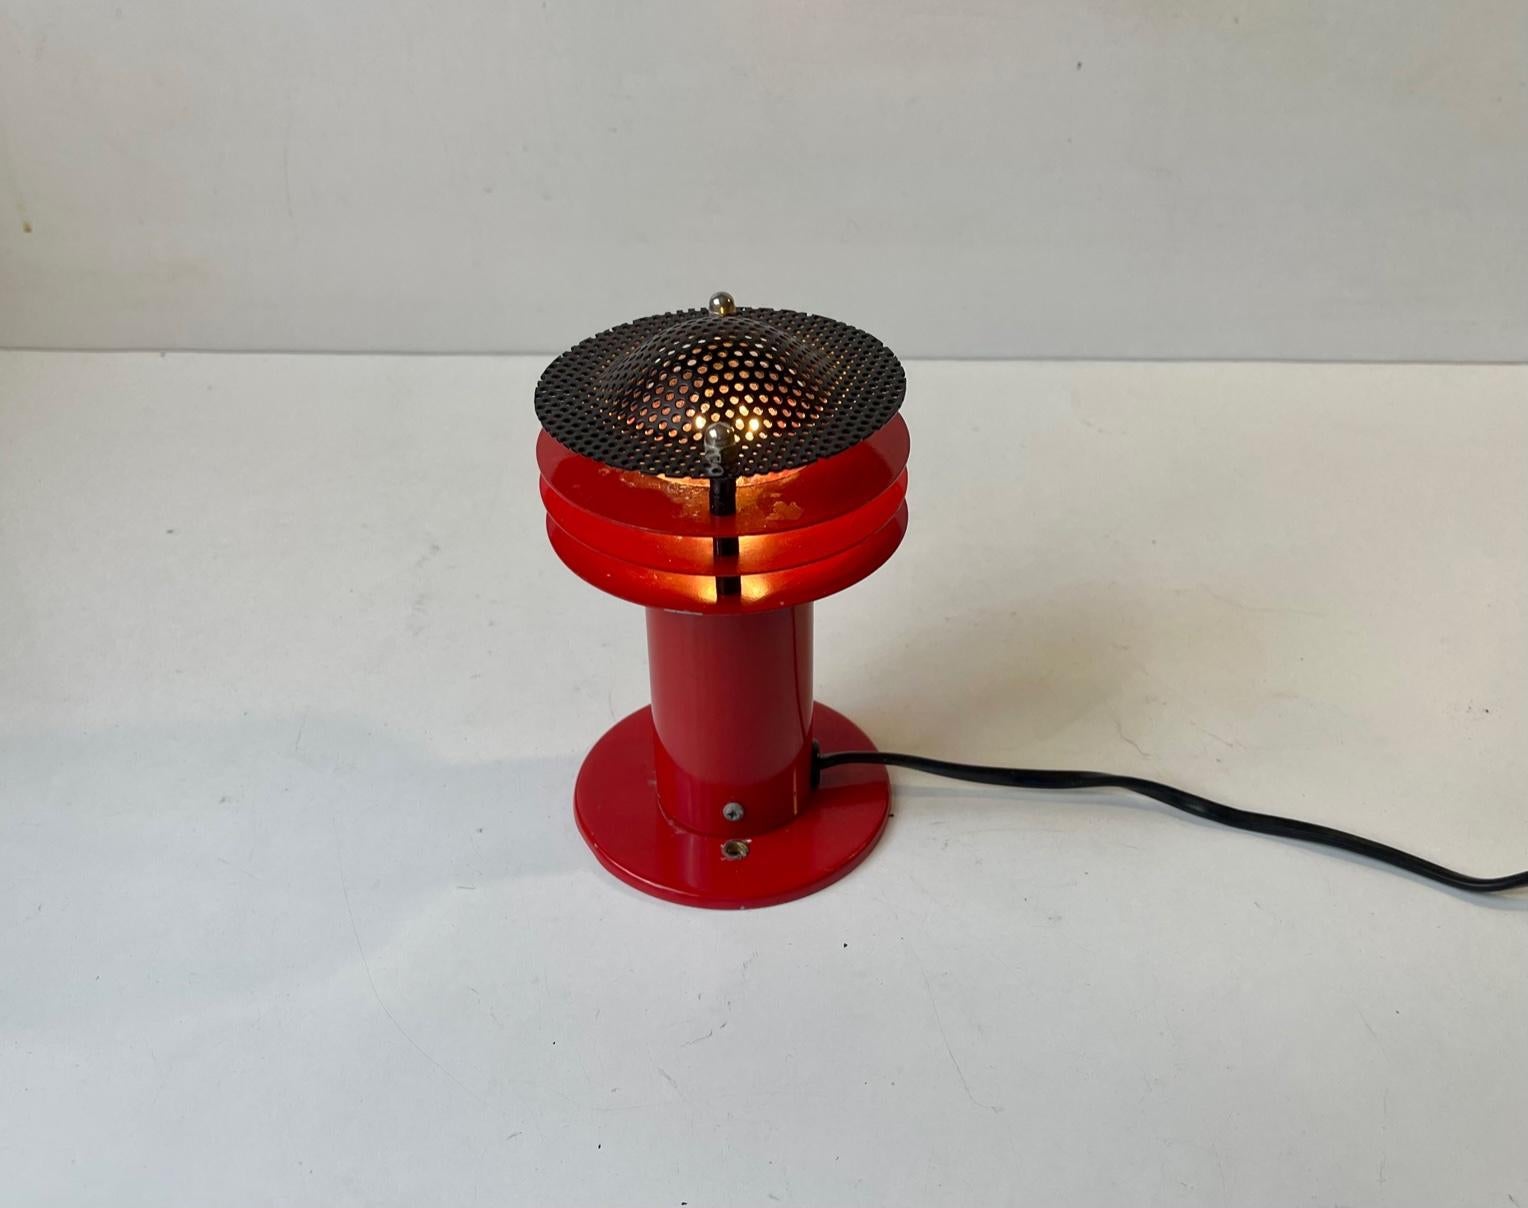 A small red and black tiered robotic wall light manufactured and designed by ABO Metalkunst in Denmark during the 1970s. Measurements: H: 15 cm, Diameter: 9 cm.